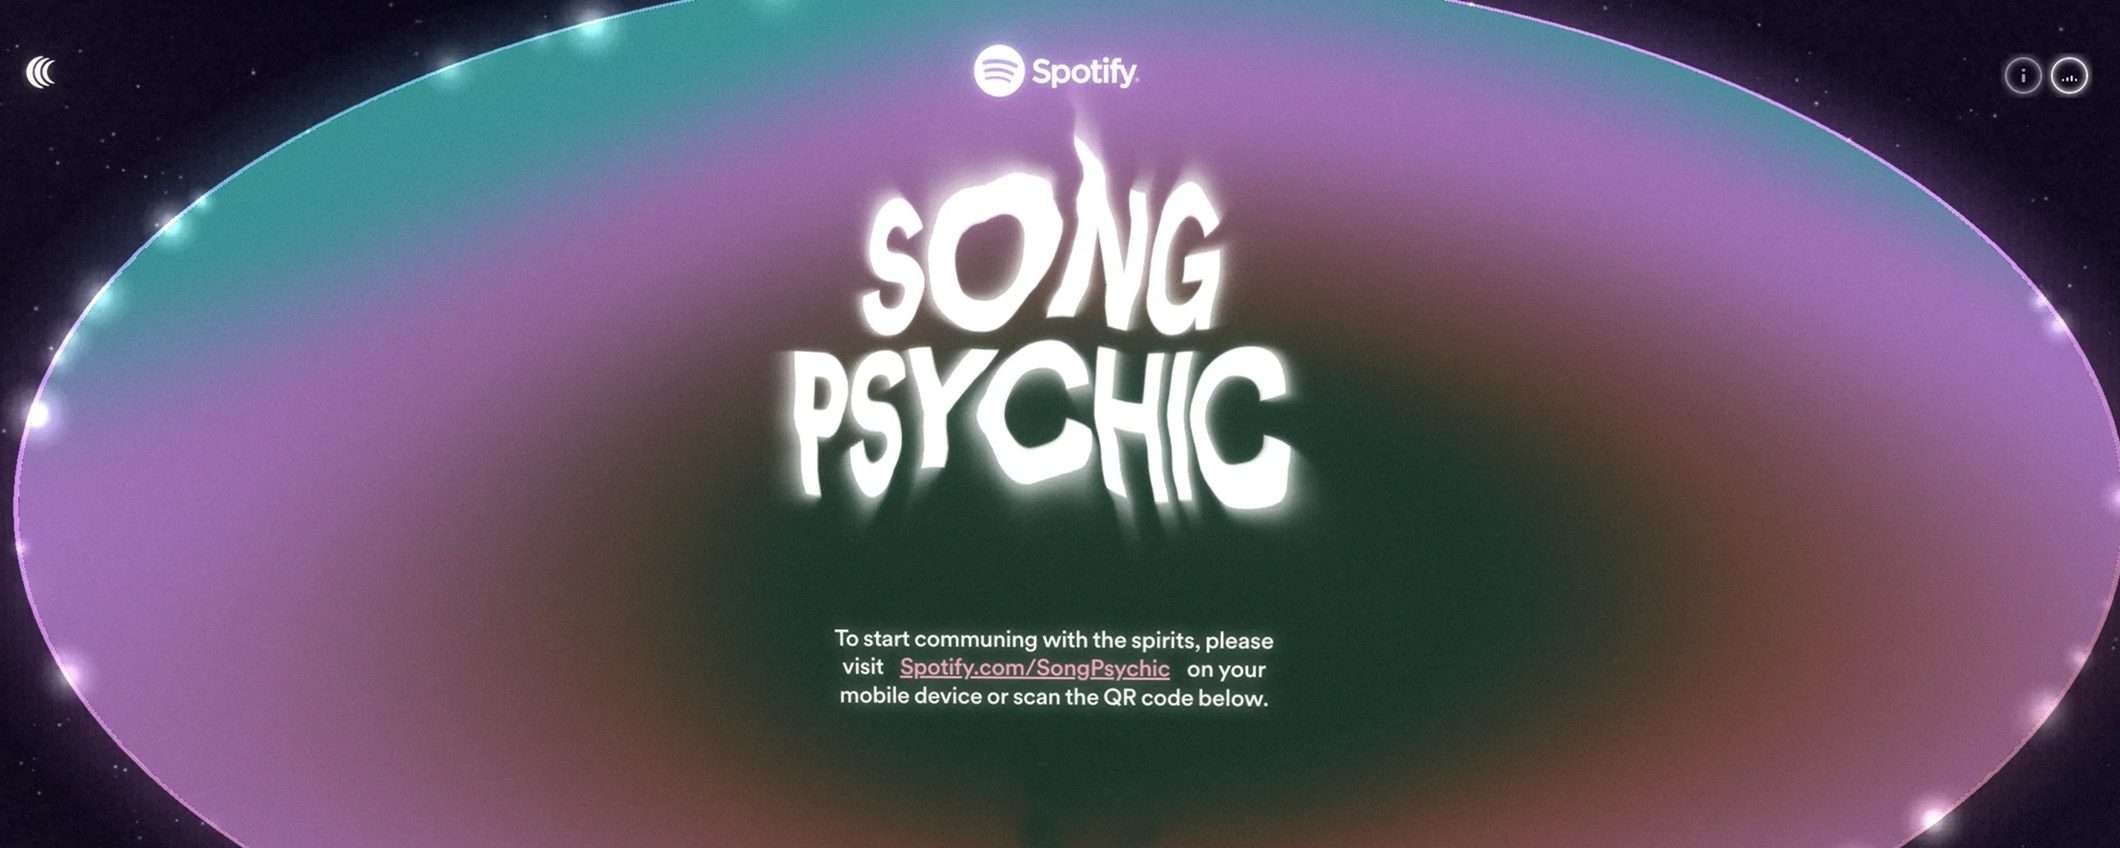 Spotify lancia Song Psychic, l'oracolo musicale